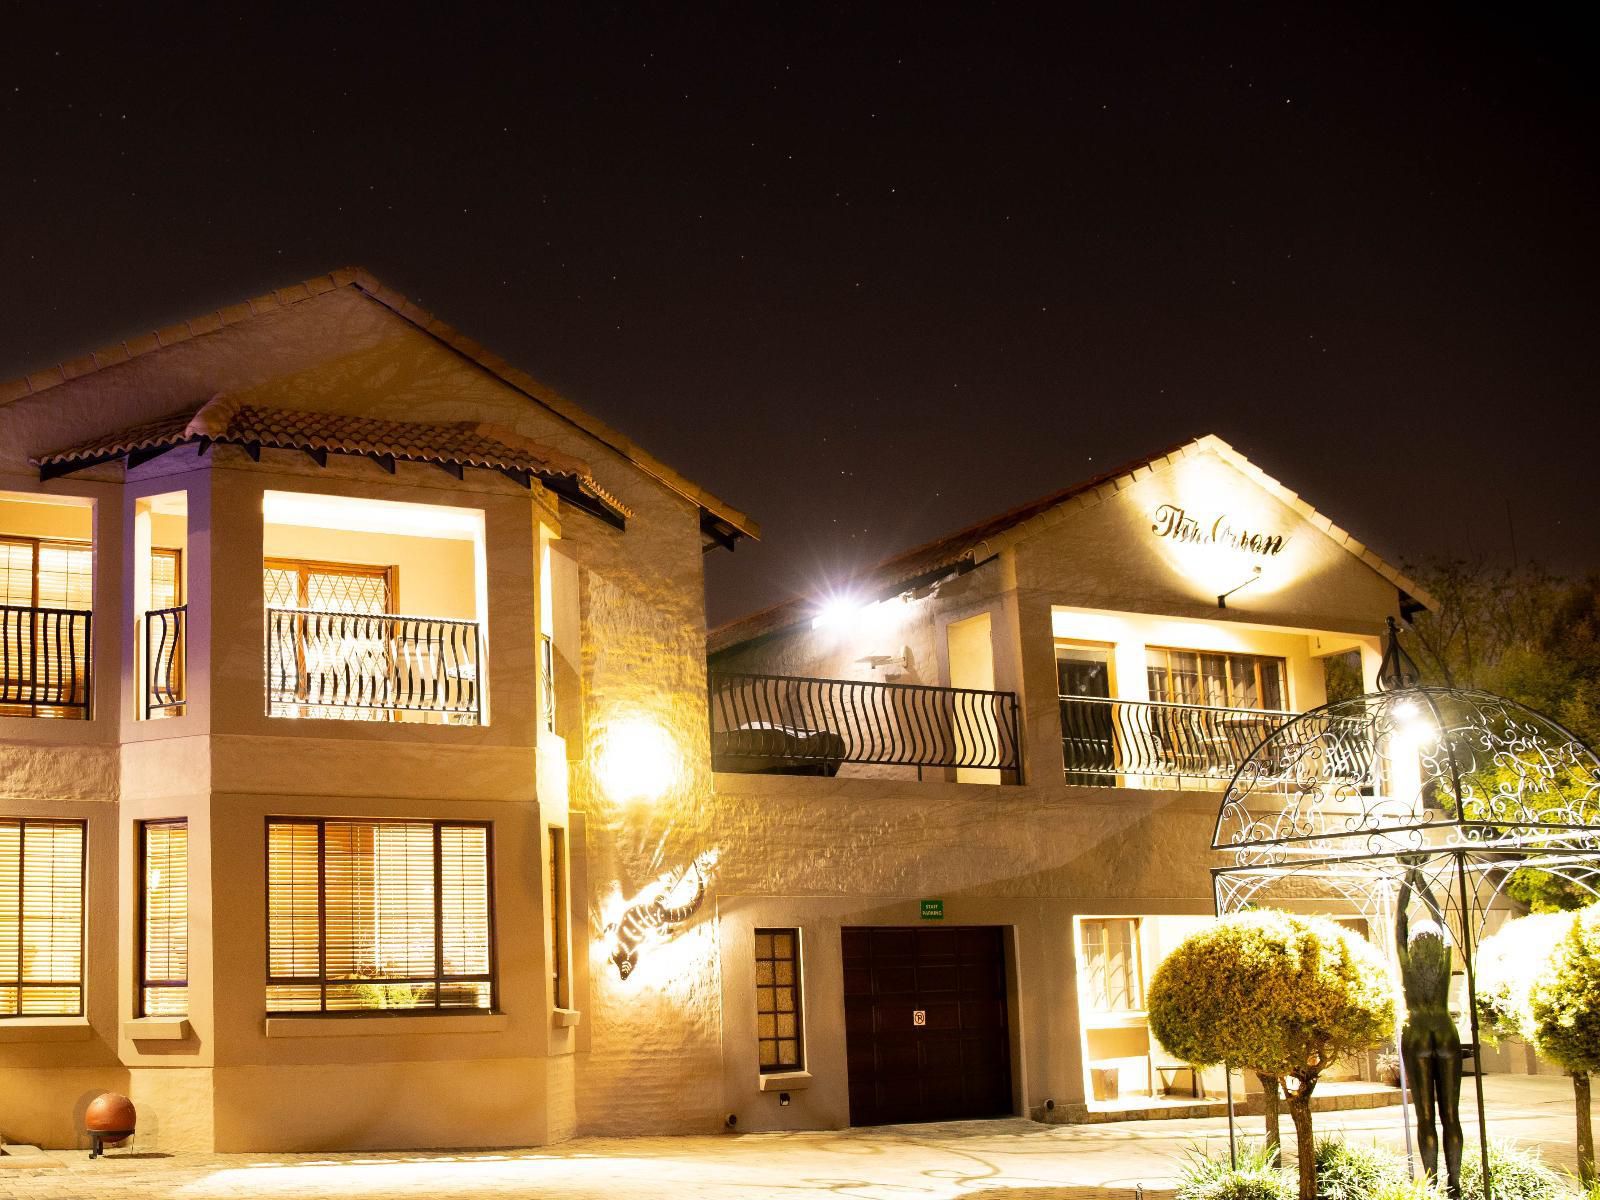 The Orion Guest House Middelburg Mpumalanga Mpumalanga South Africa House, Building, Architecture